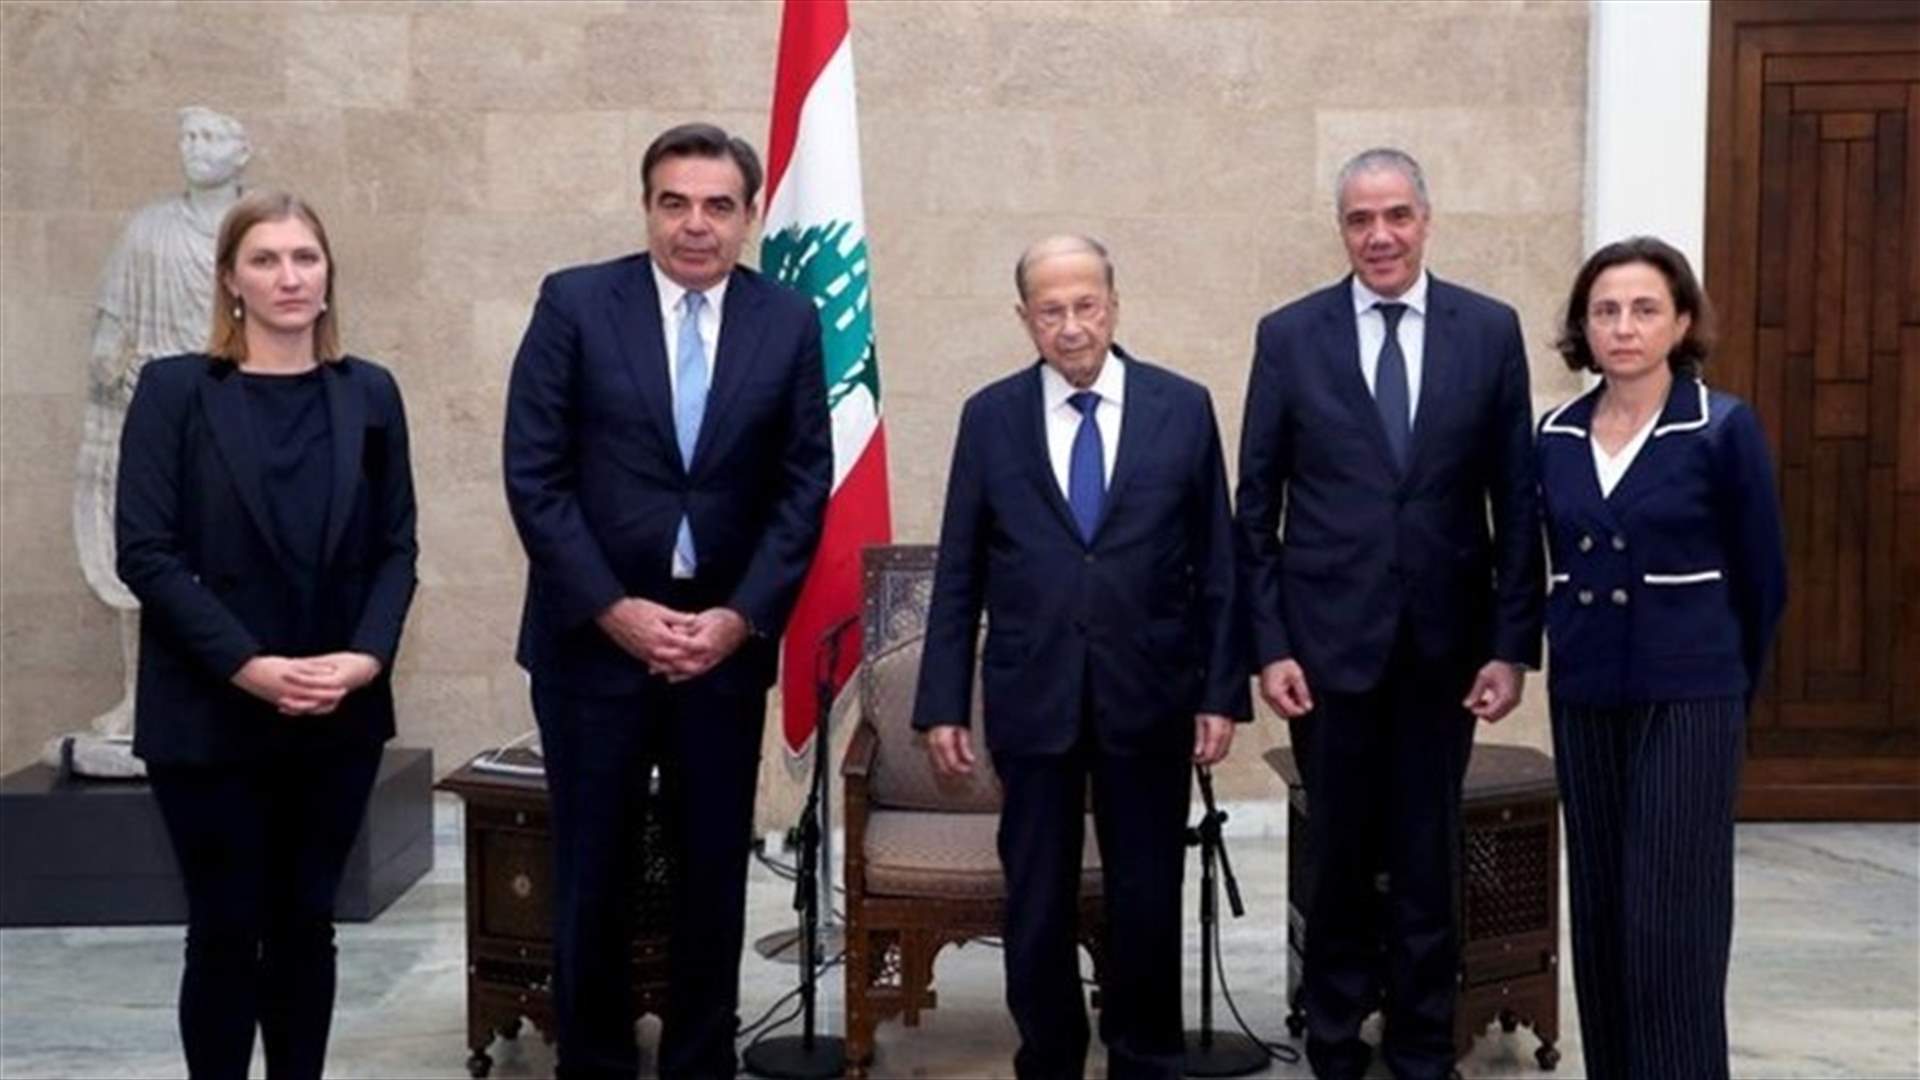 Margaritis Schinas discusses Syrian refugee crisis with Lebanese officials